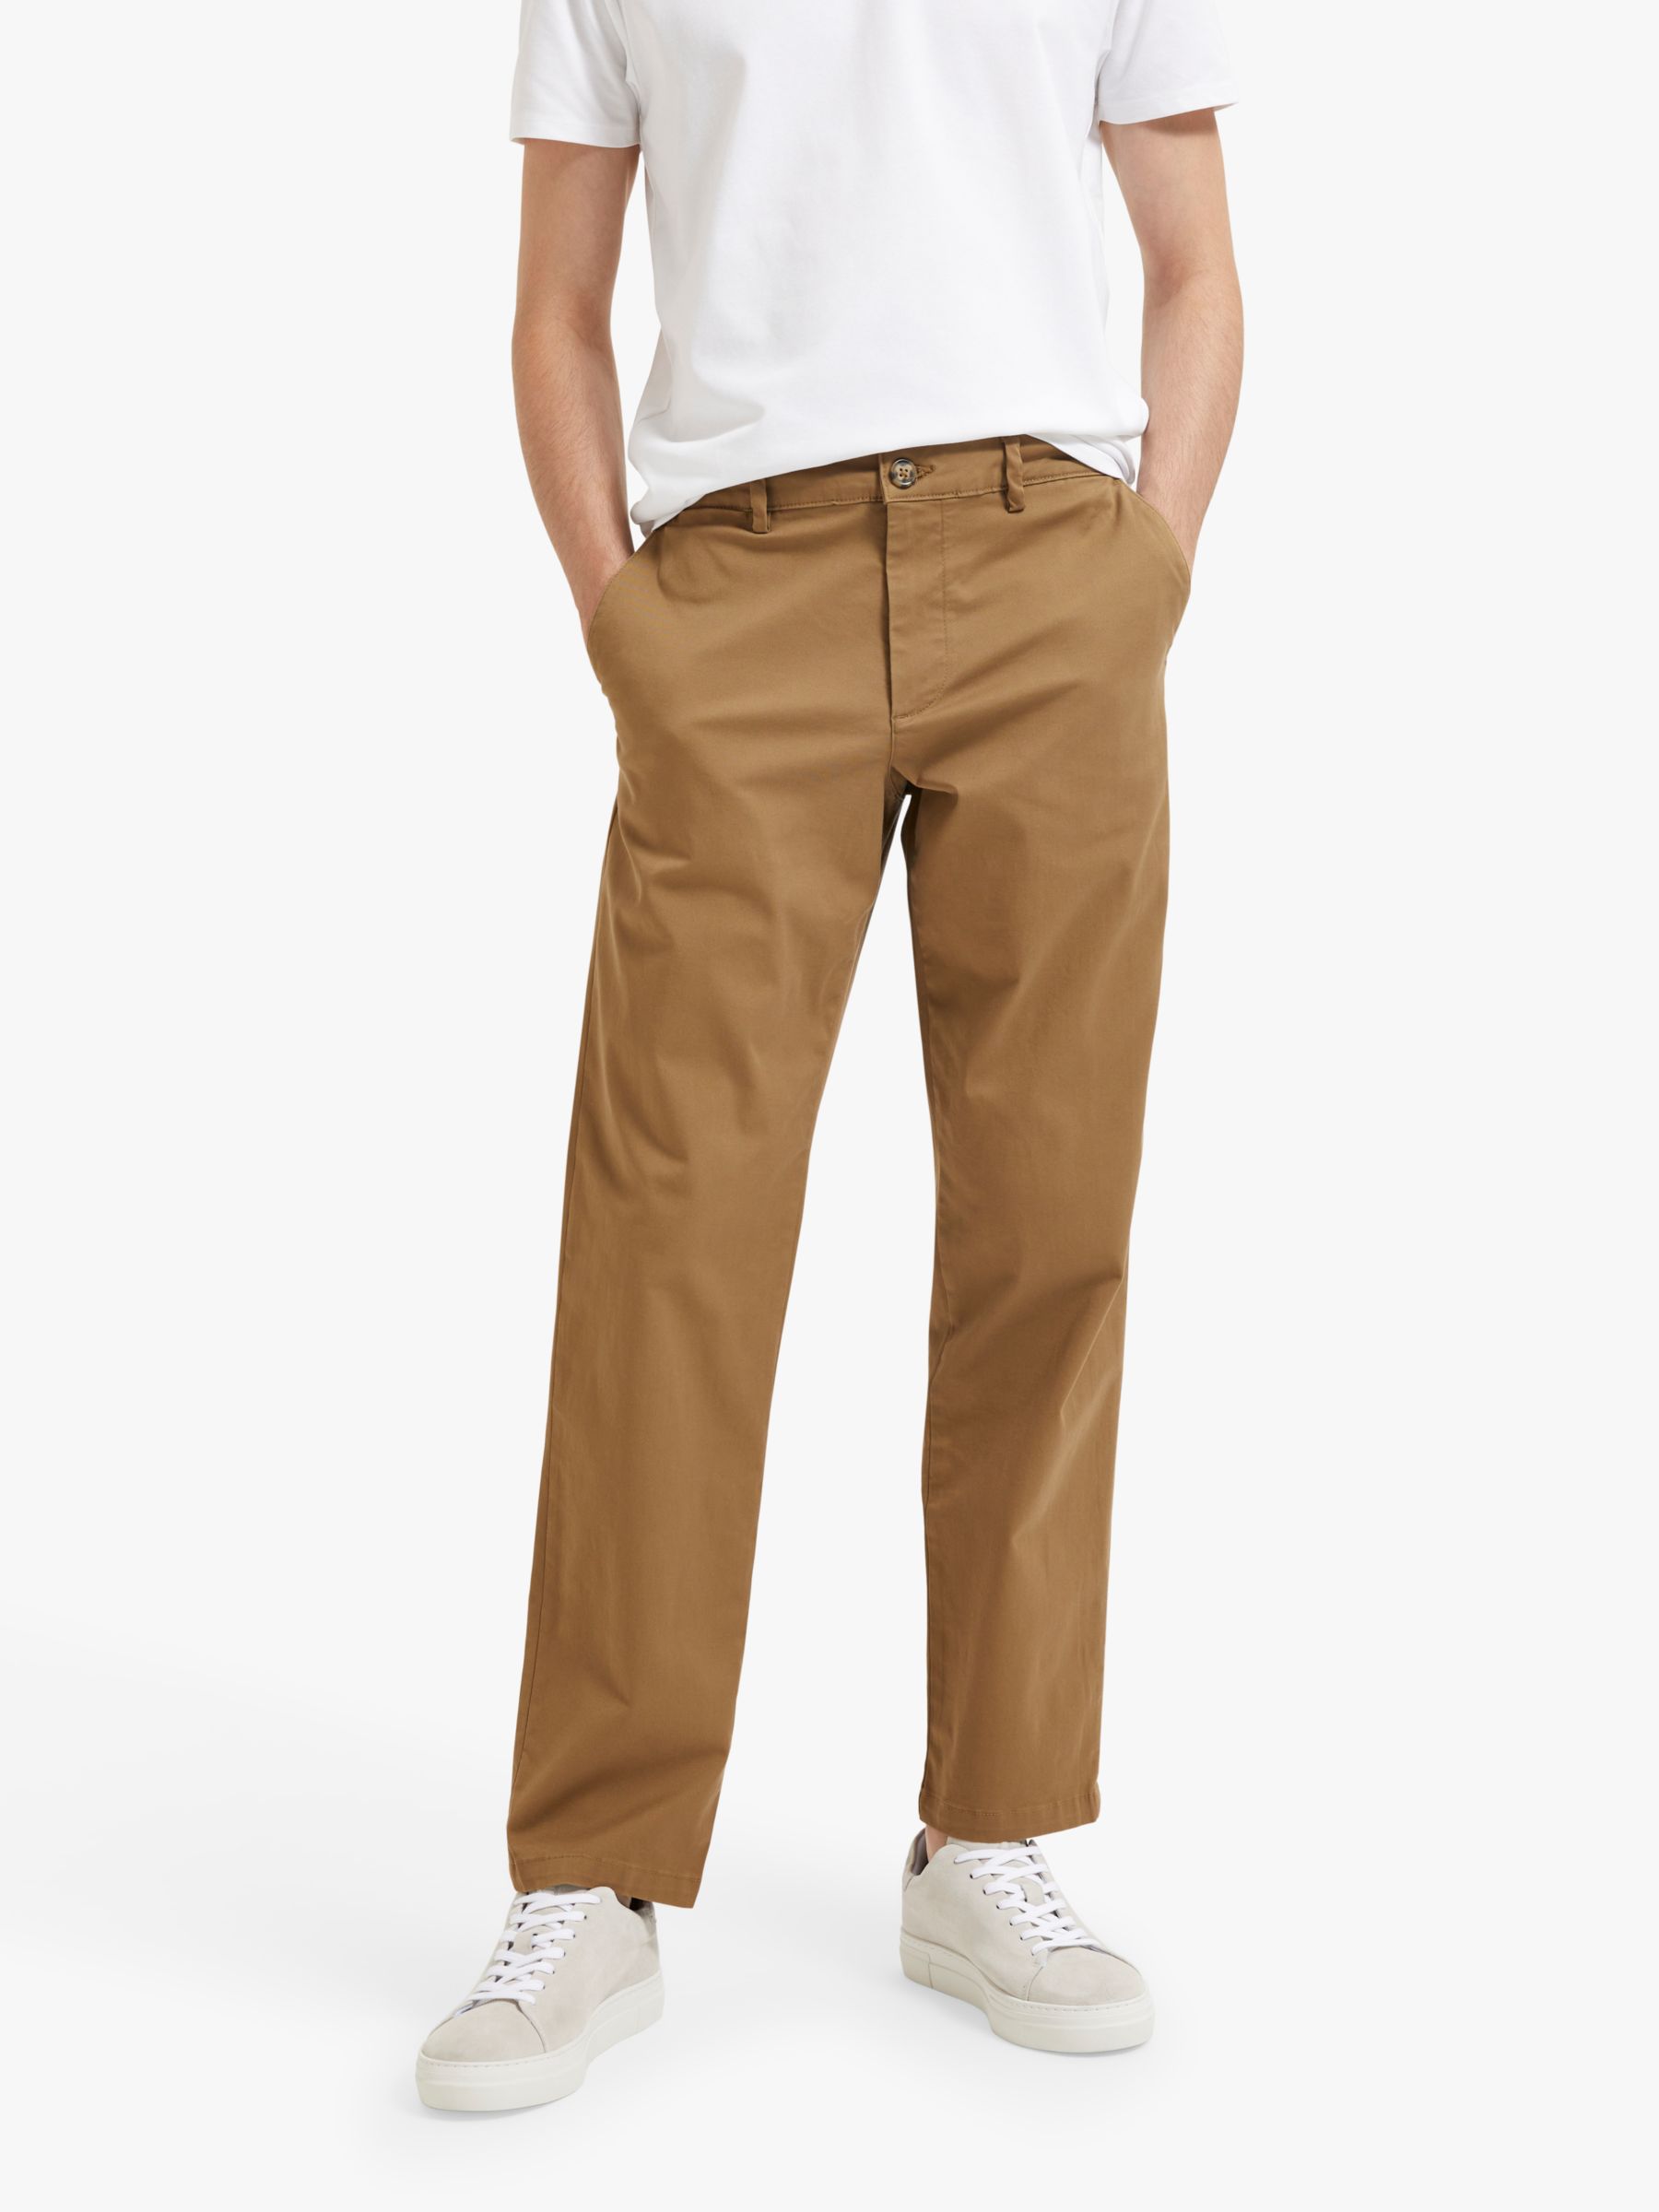 SELECTED HOMME Chino Trousers, Ermine at John Lewis & Partners